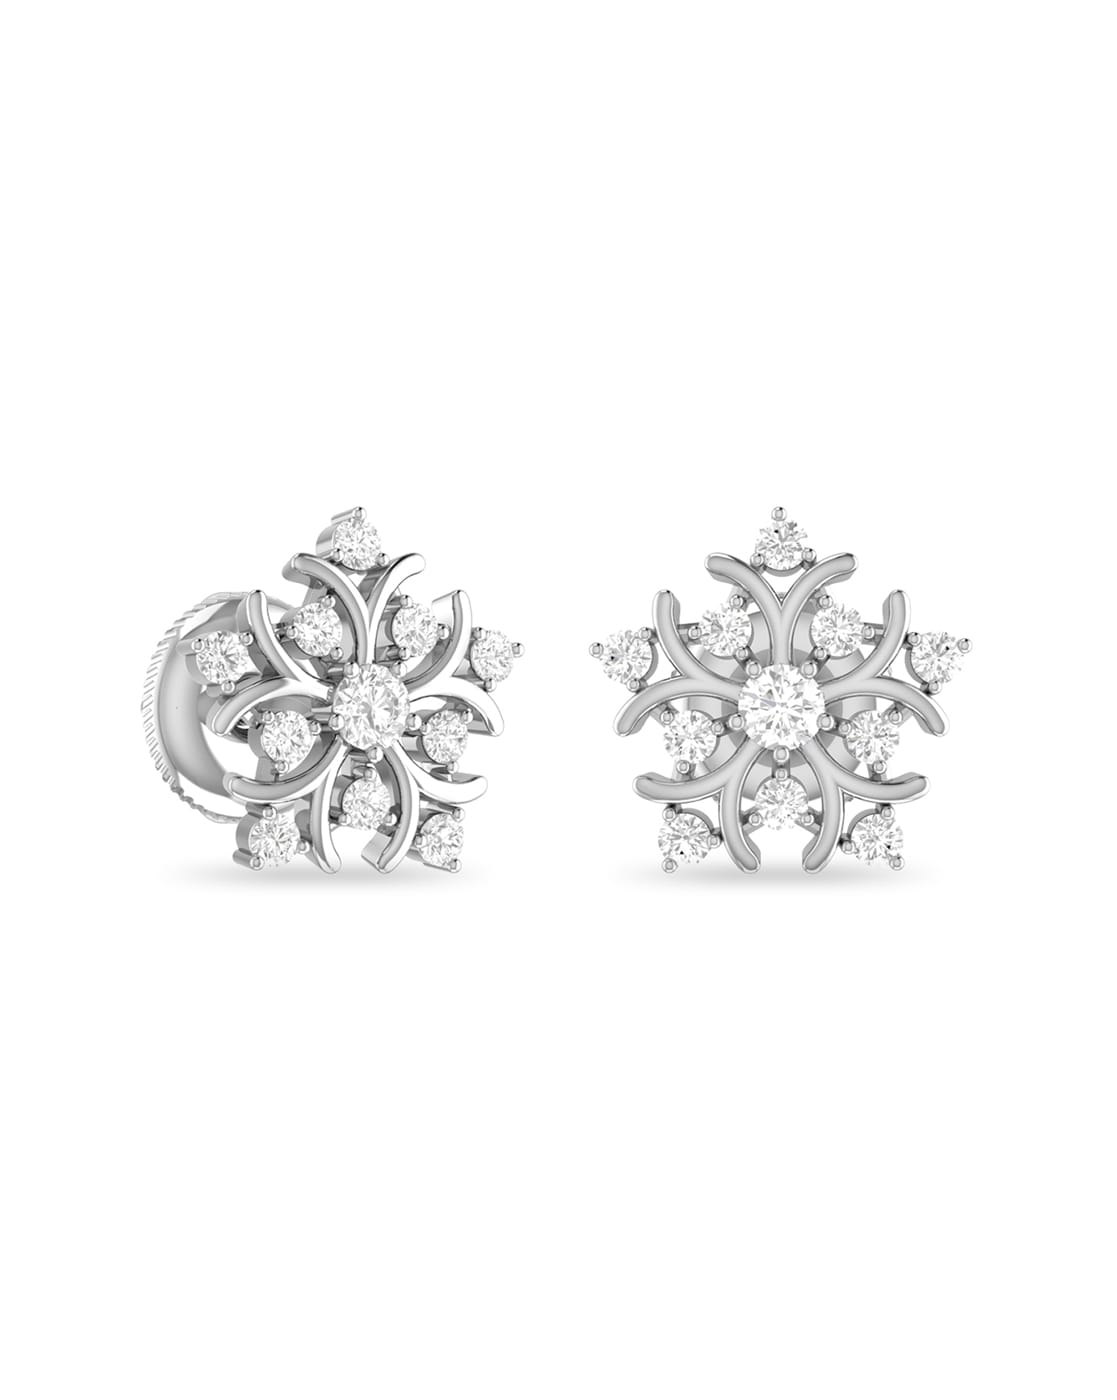 Showroom of Radiant diamond earrings studs that will sparkle and shine |  Jewelxy - 239943